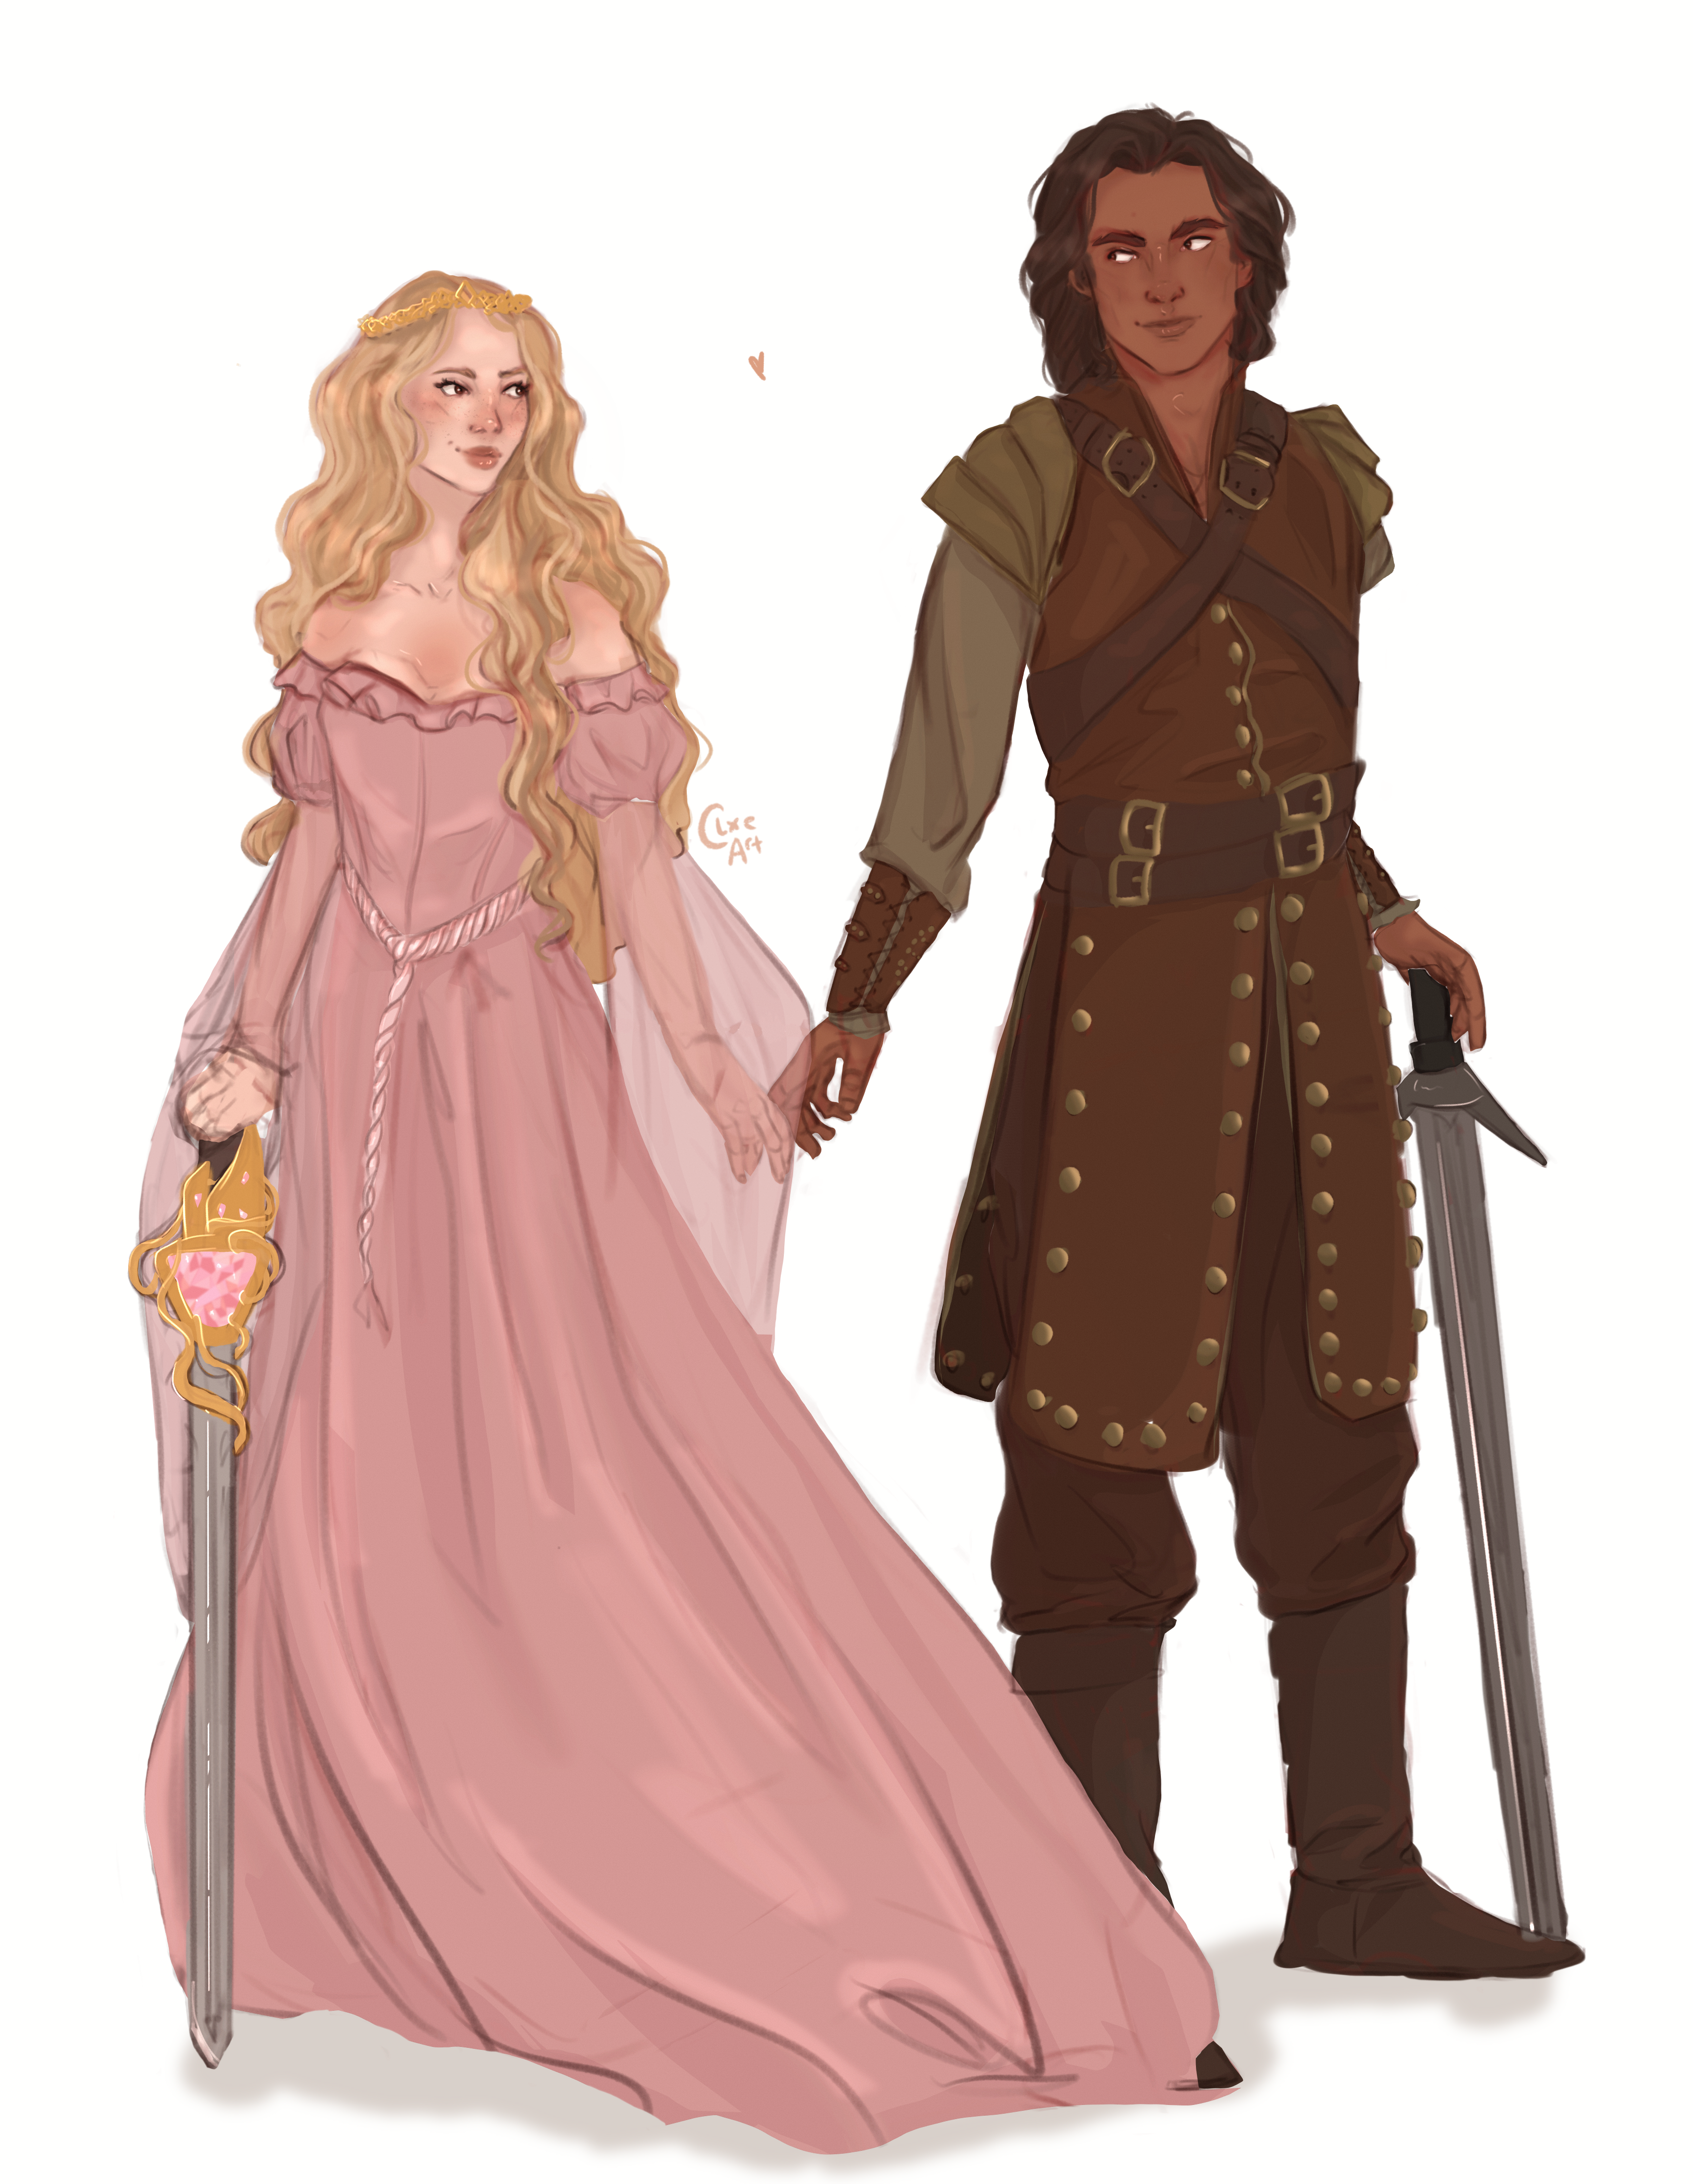 Illustration of the two main characters of Medievally Blonde. Ronan, a man in brown leather armor, and Cliodhna, a medieval princess in a pink flowing dress. They're holding hands, and there's a small illustrated pink heart between them. They both hold swords, Ronan's is a simple longsword. Clíodhna's has a huge pink jewel in the center of the hilt, with gold vines wrapping around it.